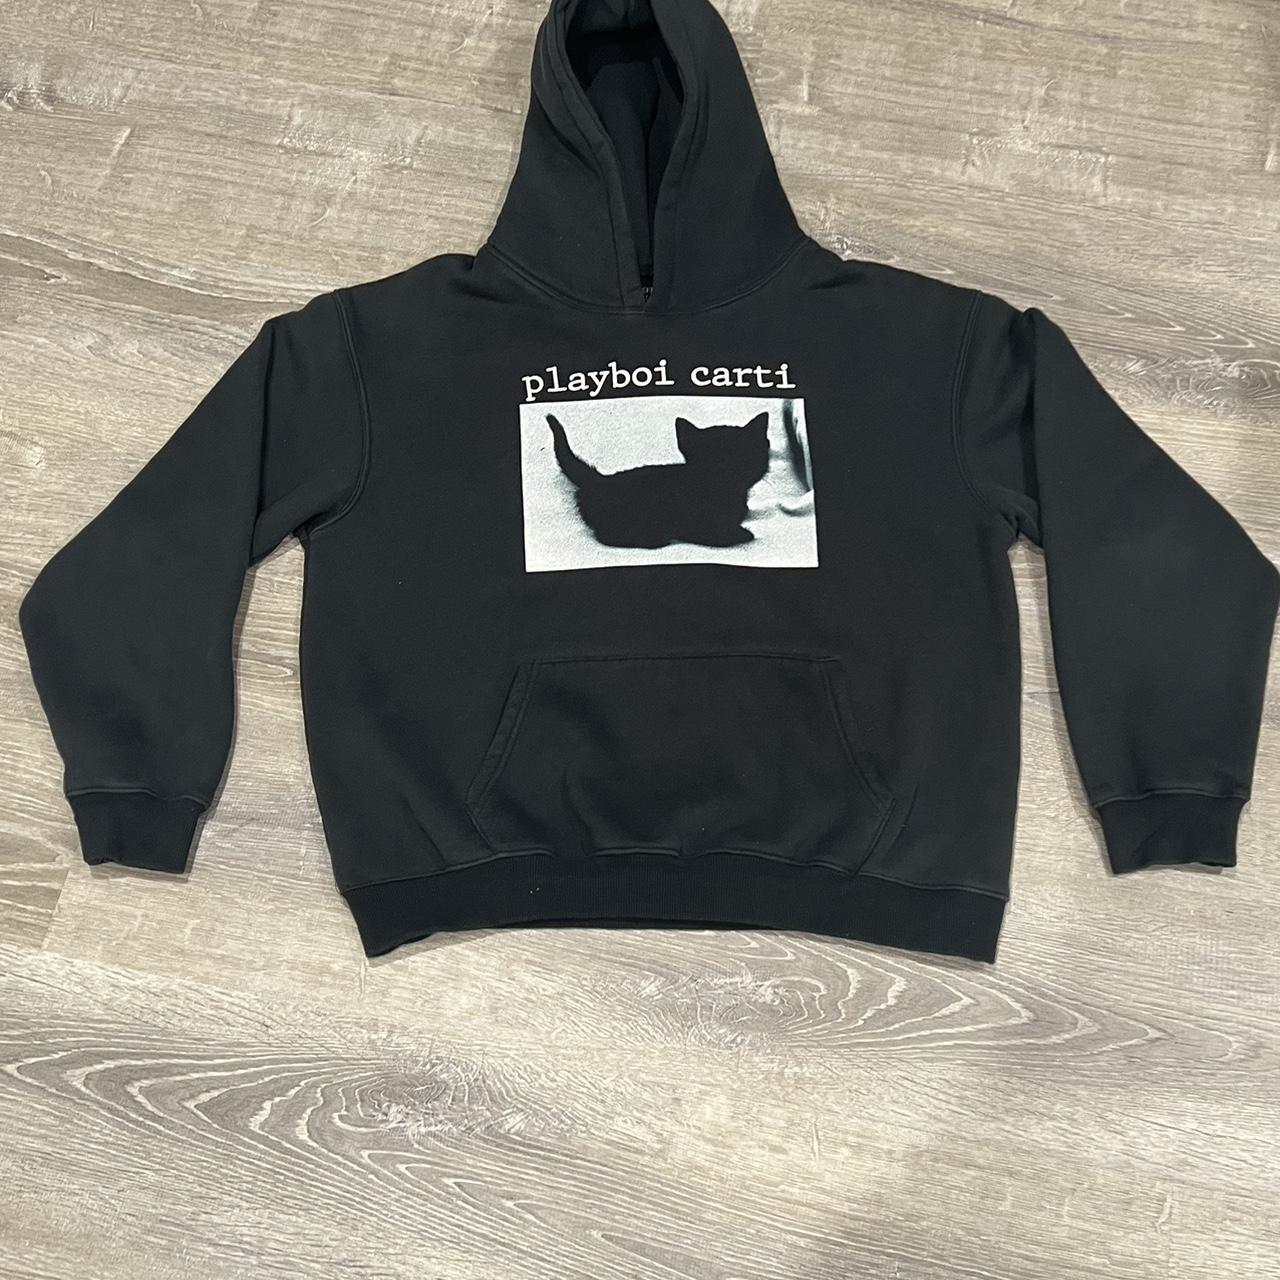 Playboy carti wlr cat hoodie Good condition don’t... - Depop